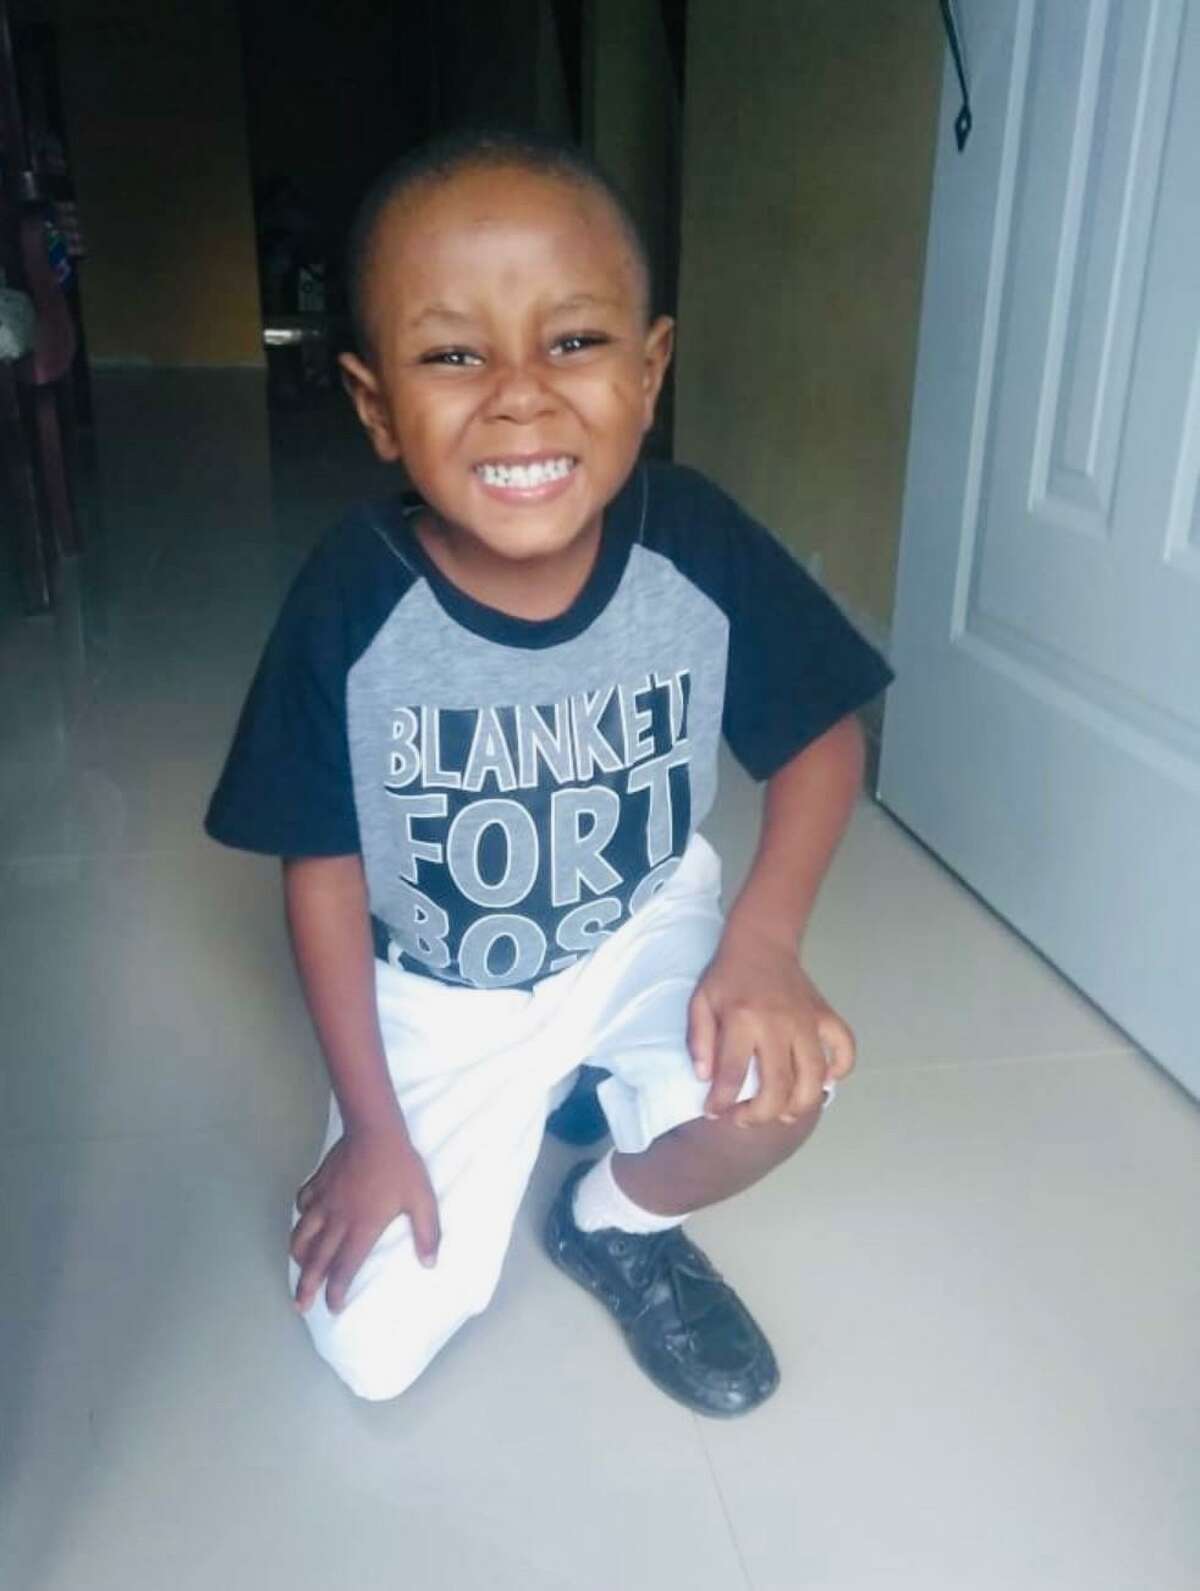 A Texas student is trying to adopt a kid he found abandoned in the trash.